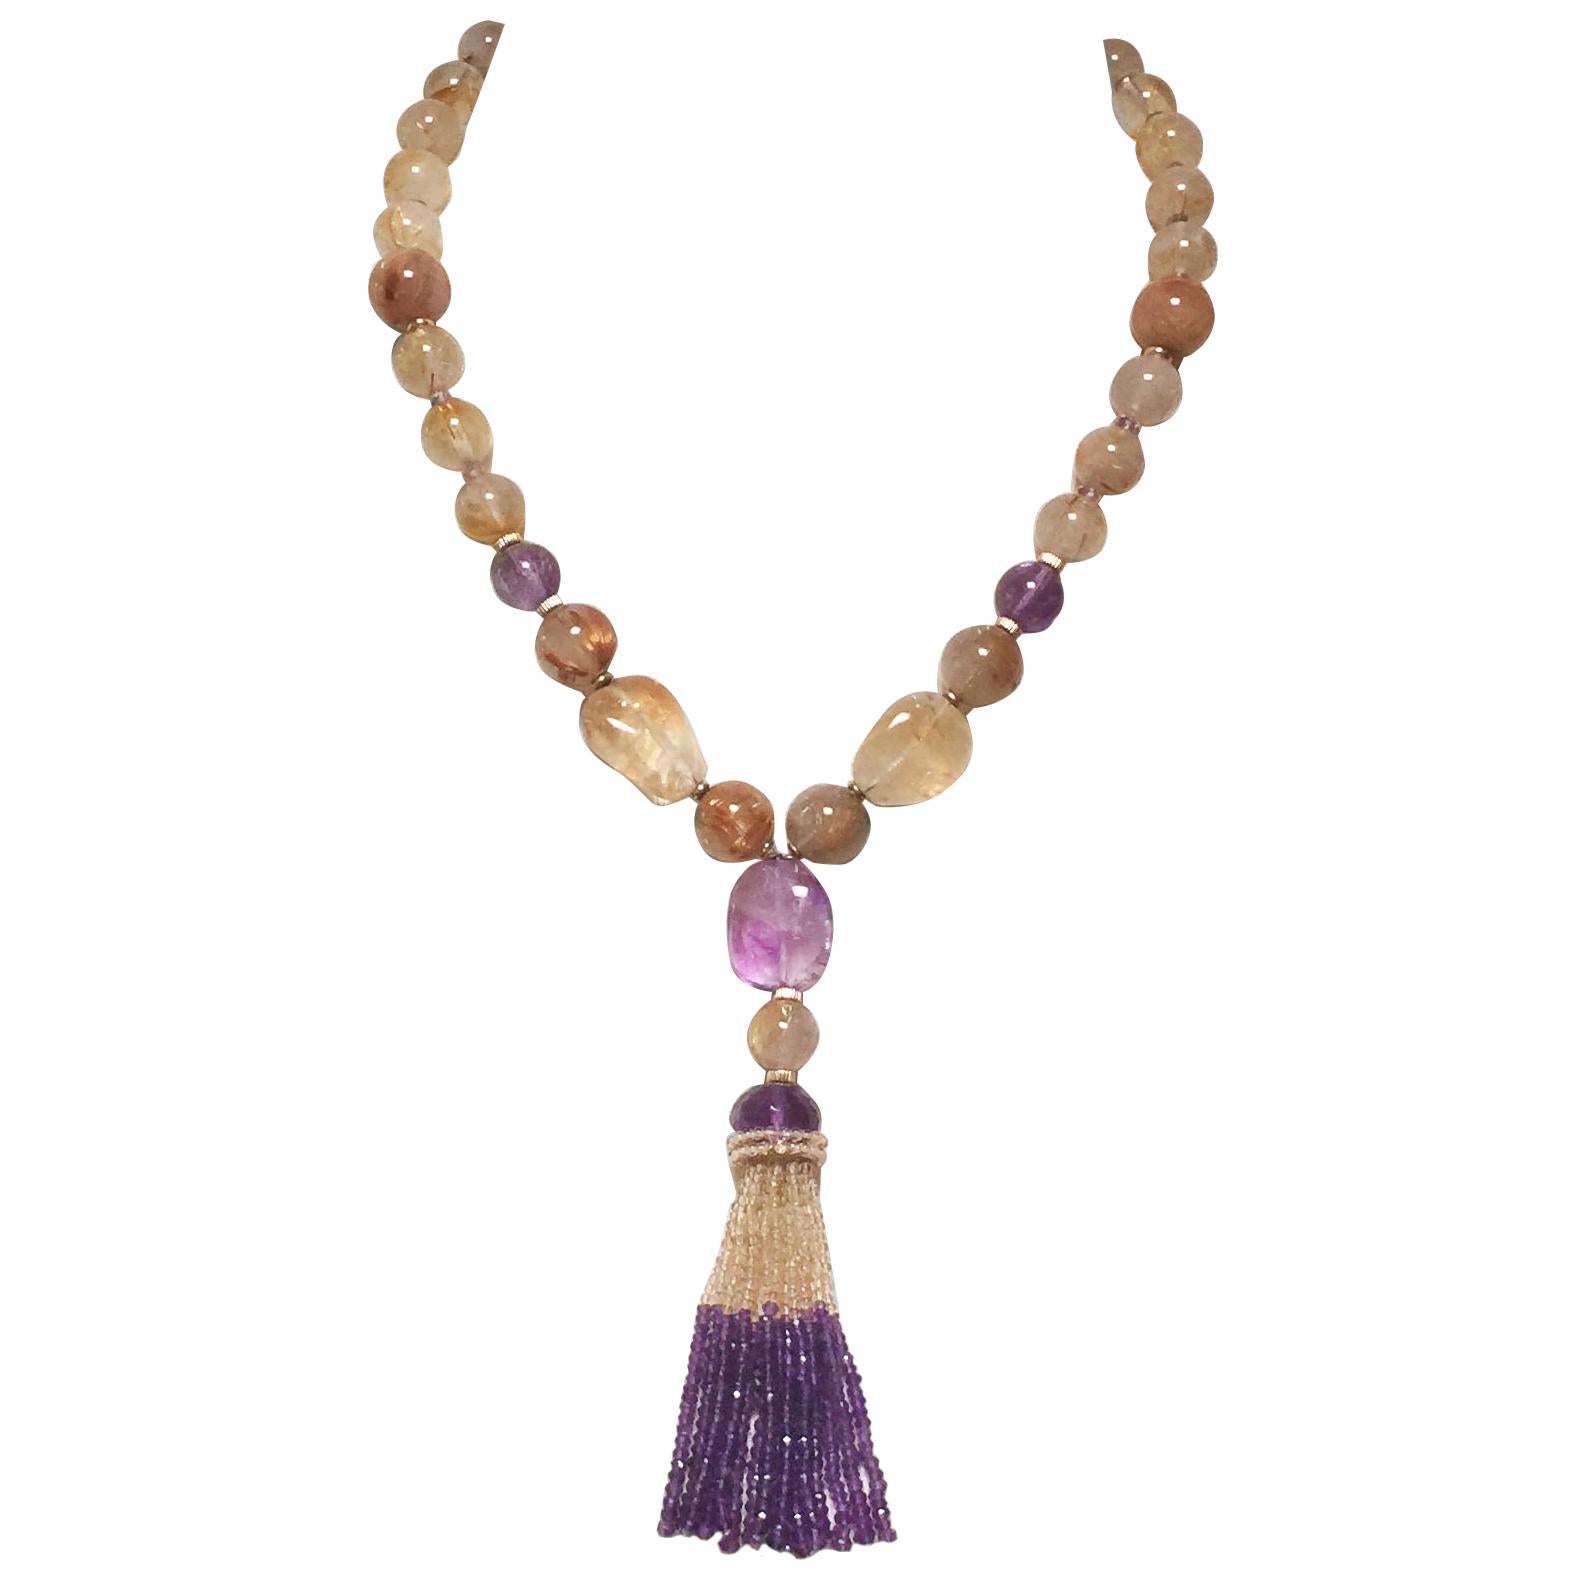 Citrine and Amethyst Beaded Necklace with 14 K Yellow Gold Magnetic Clasp